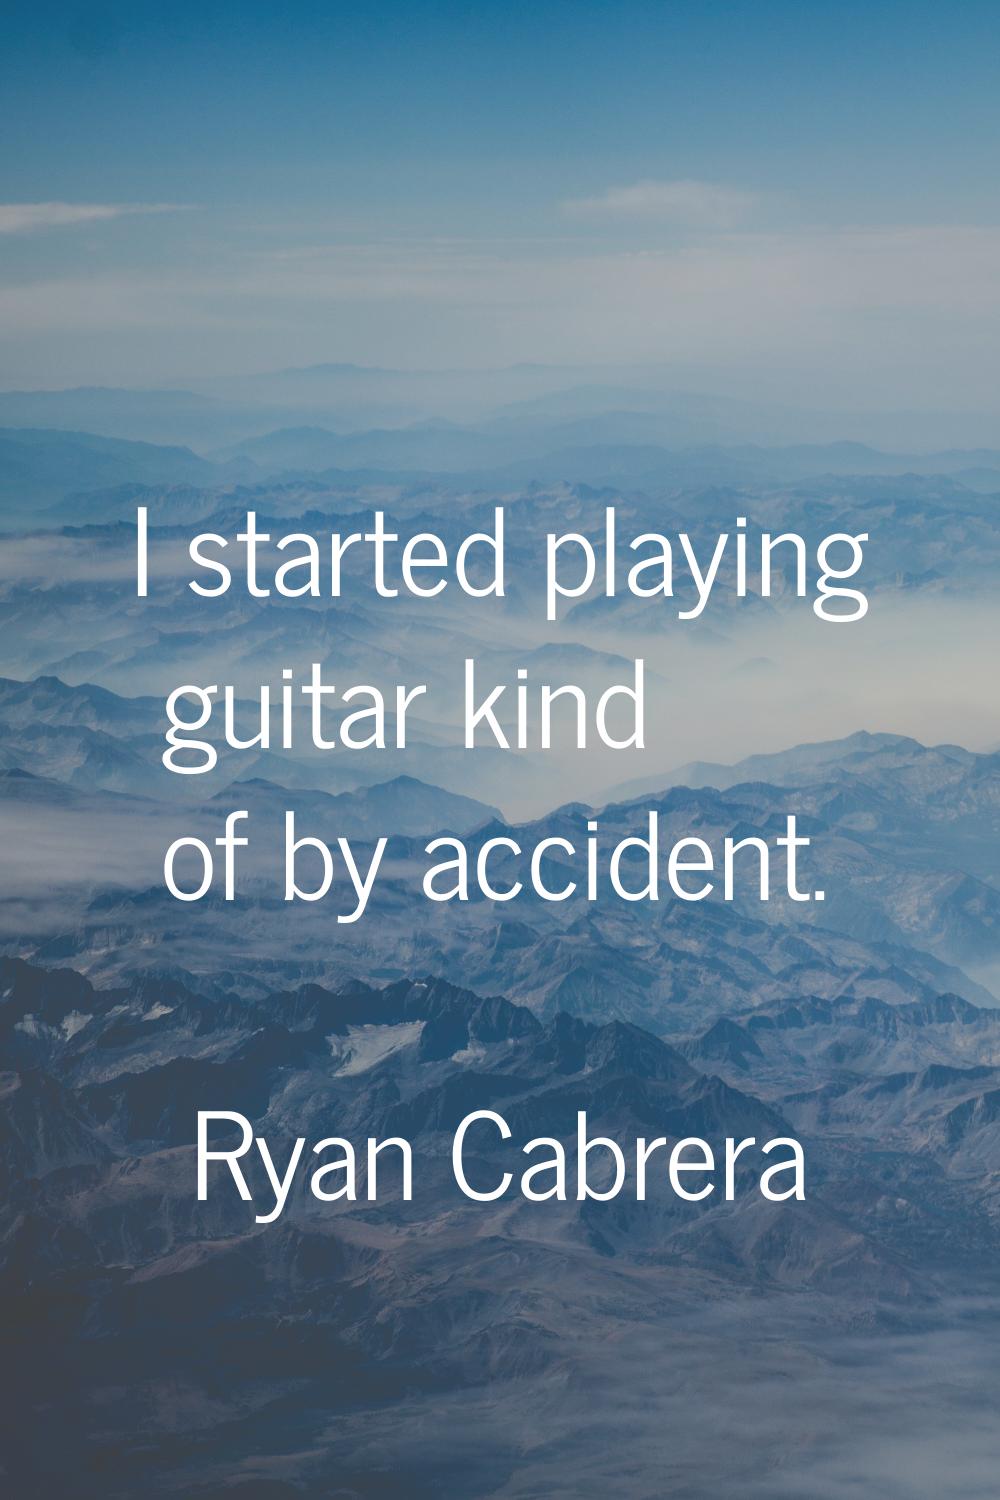 I started playing guitar kind of by accident.